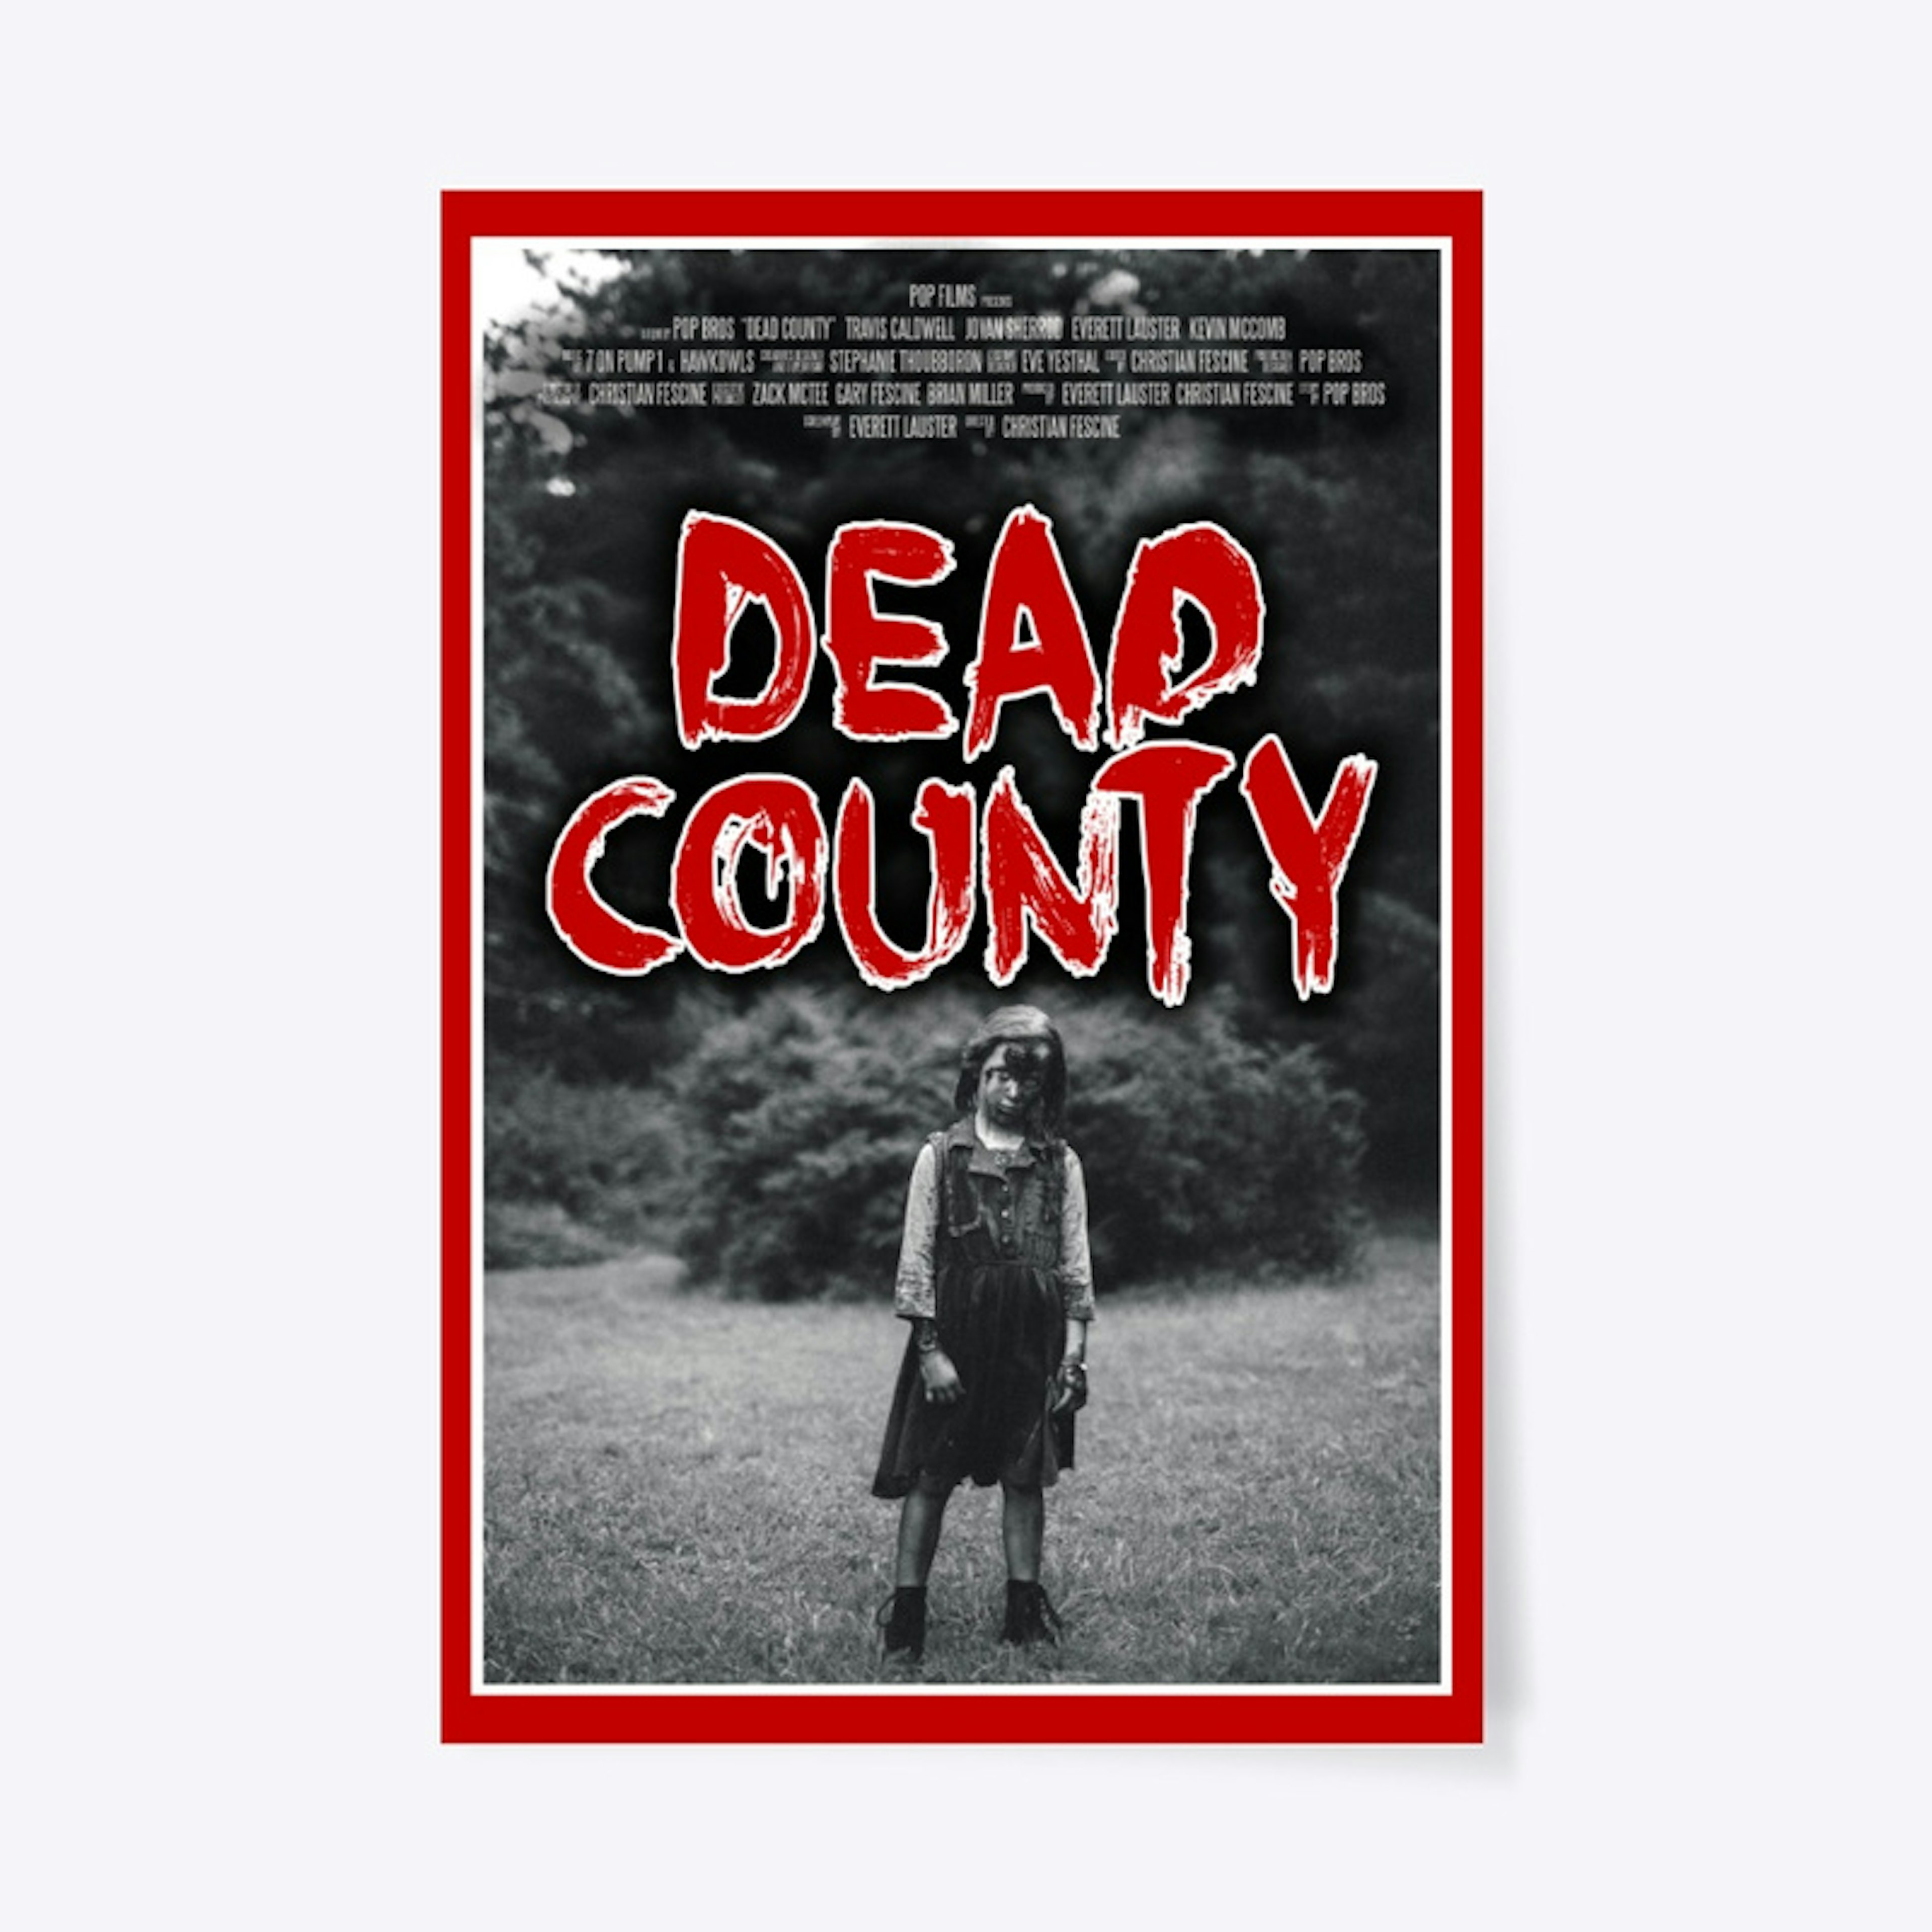 DEAD COUNTY movie poster 1